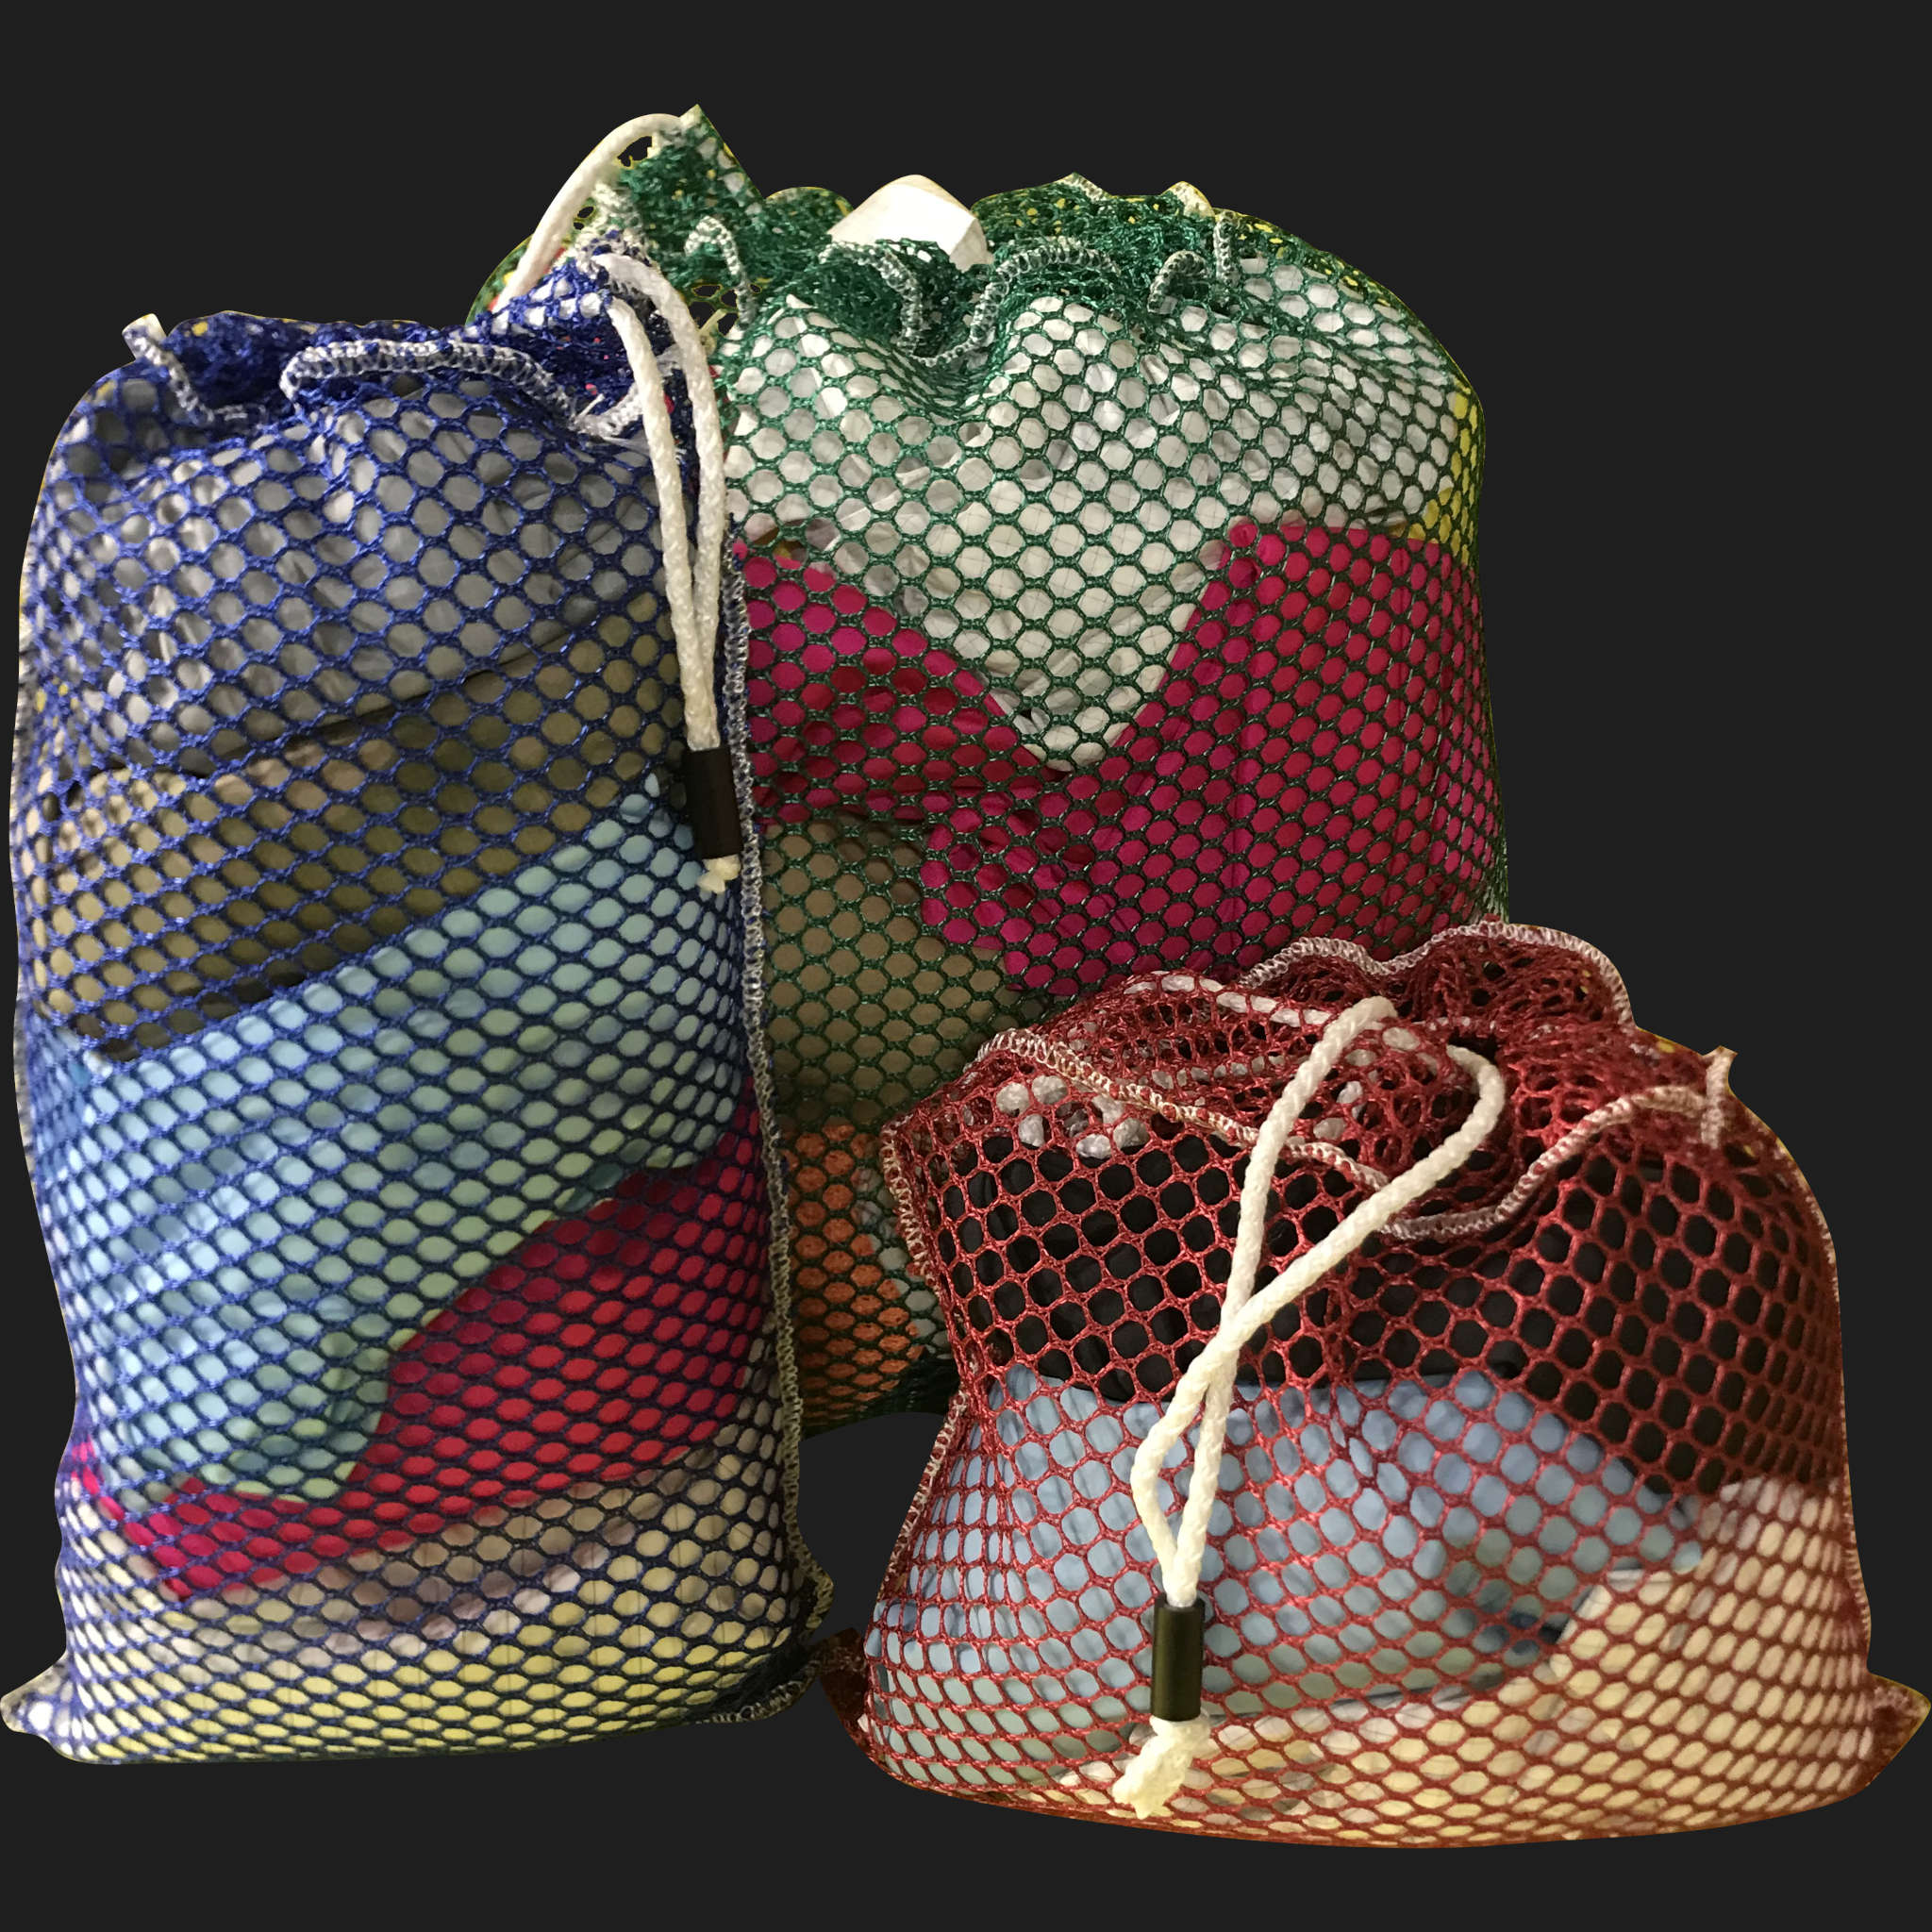 32" x 54" Customized Mesh-Net-Laundry Bags Heavy Duty with Cord and barrellock closure